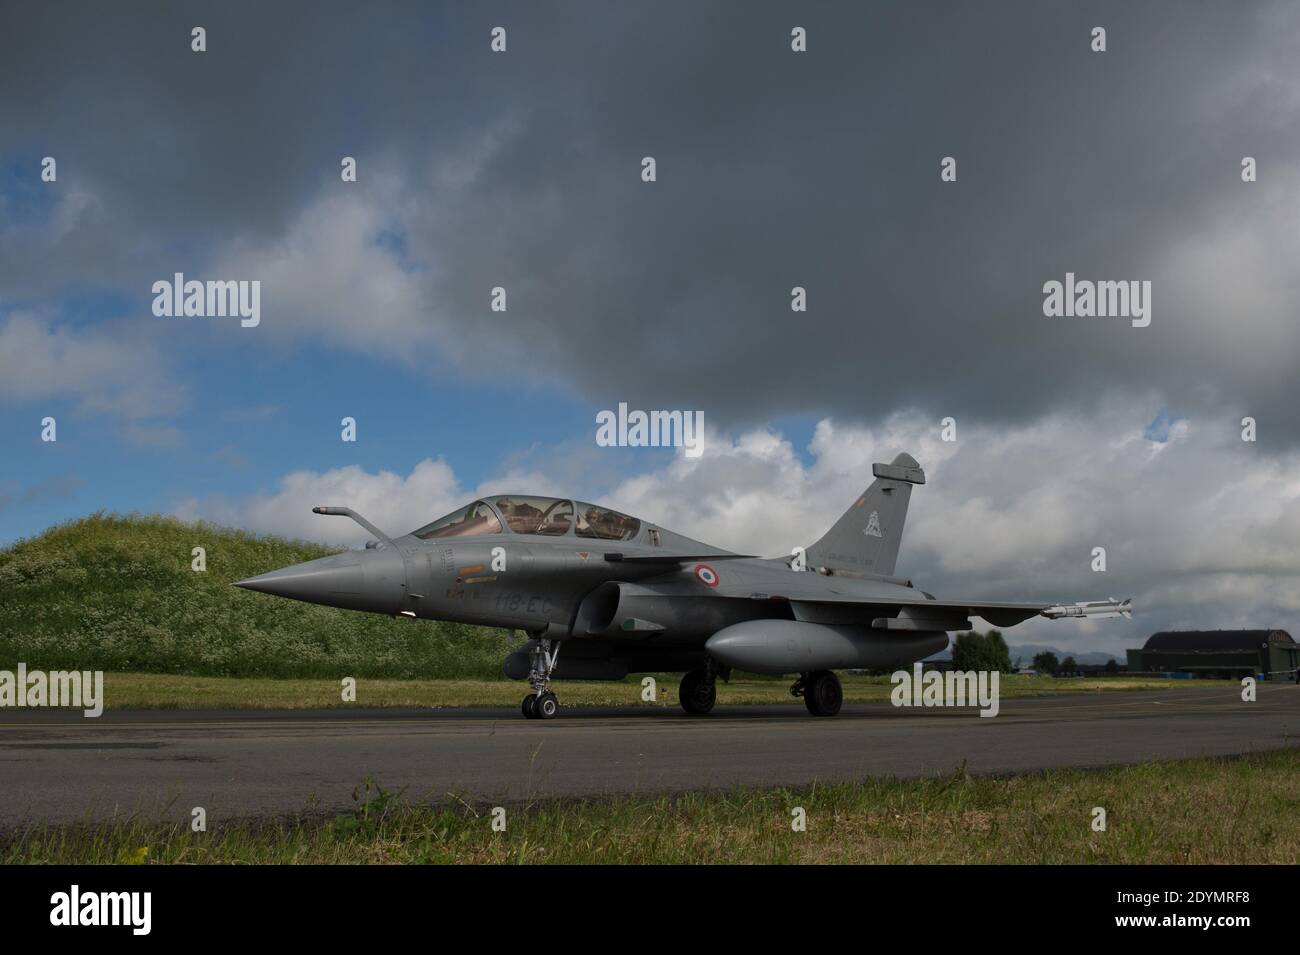 A Rafale fighter aircraft of the French Air Force is about to take off at  the Military base of Orland, Norway, on June 21, 2103. The NATO Tiger  Association or the Association